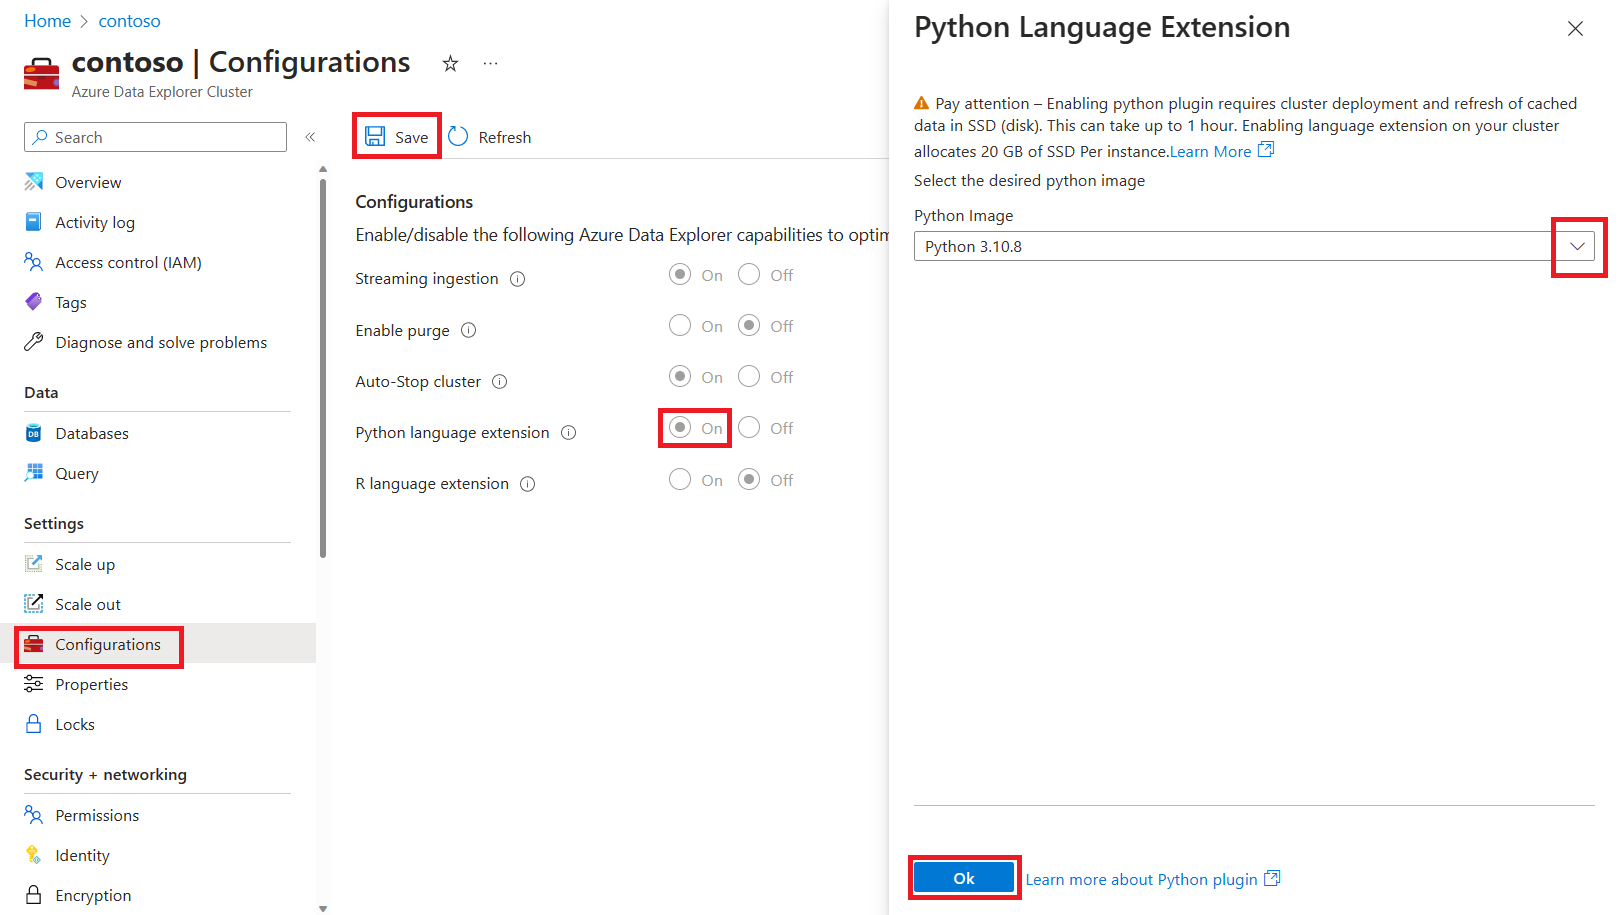 Screenshot of Azure Data Explorer cluster configuration page, showing the Python language extension image selection.